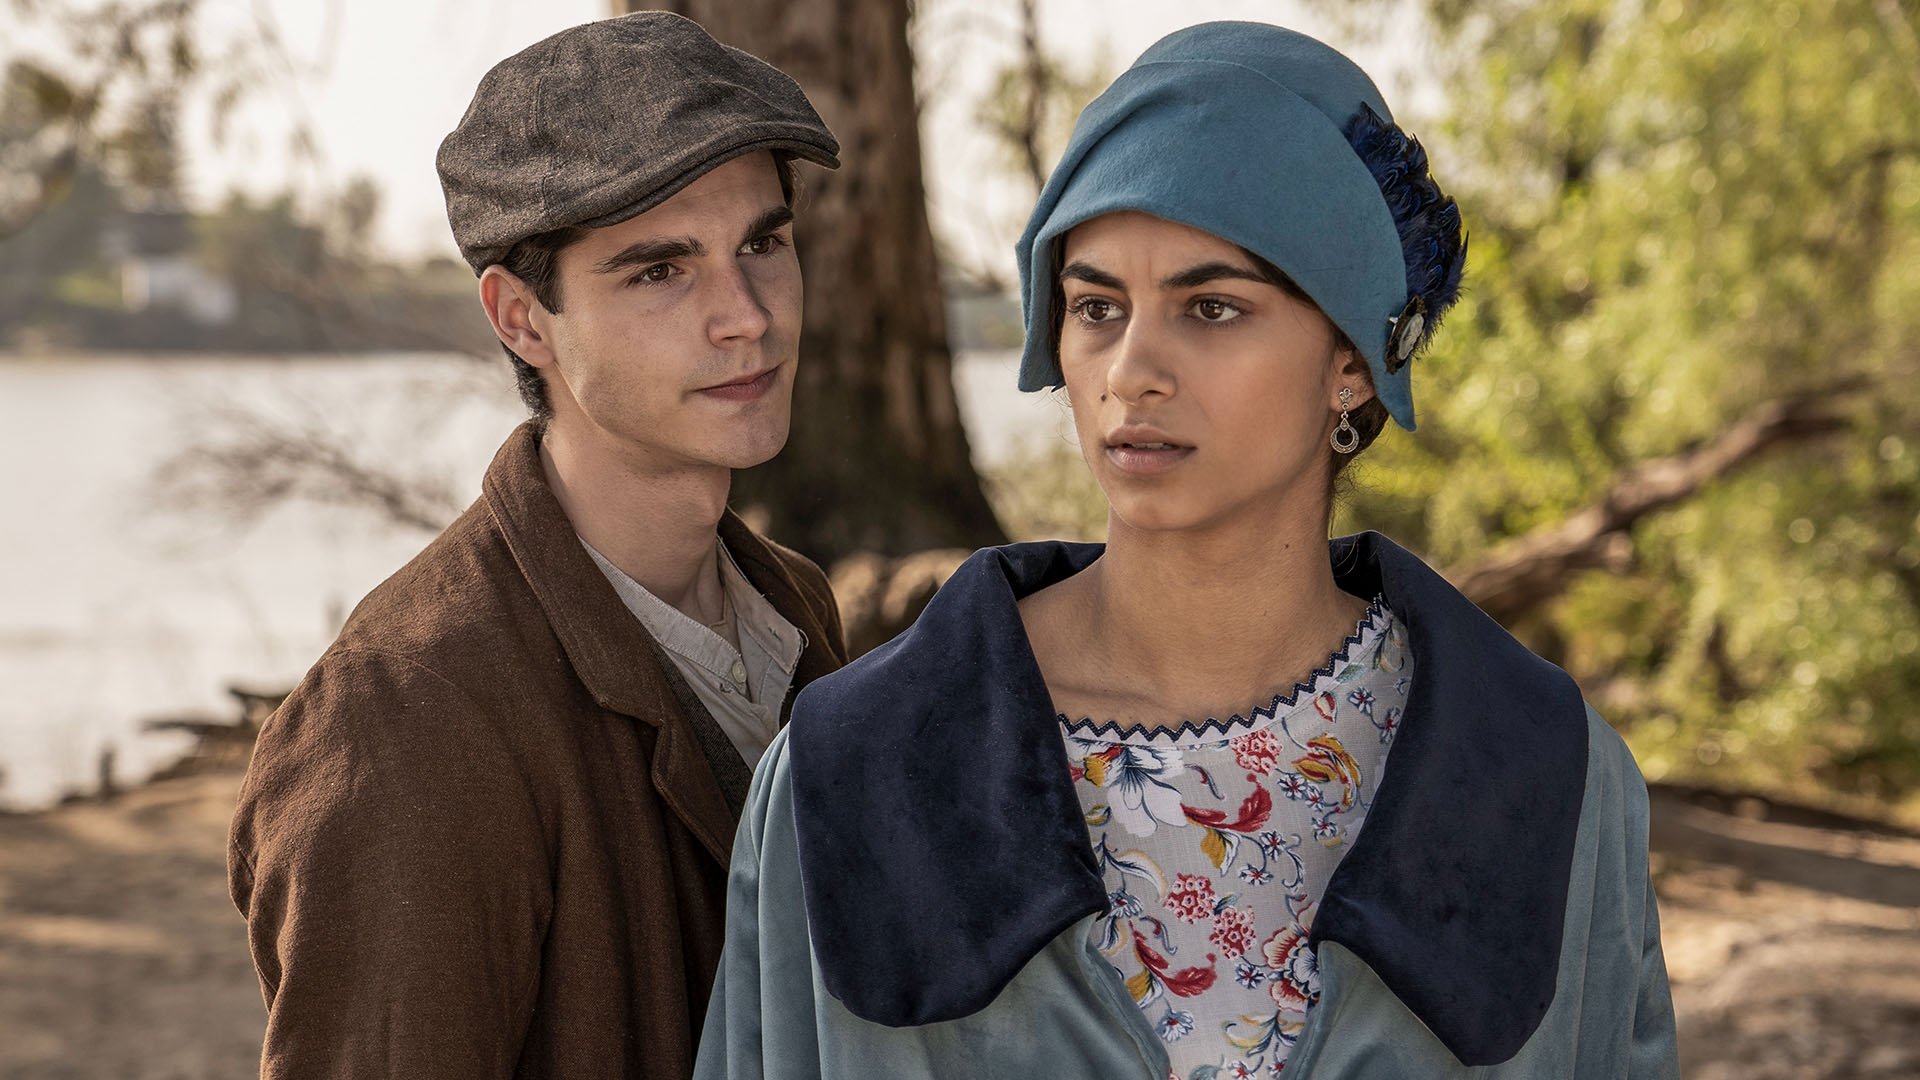 A man and a woman dressed in 1920s fashions in 'La Otra Mirada' on PBS